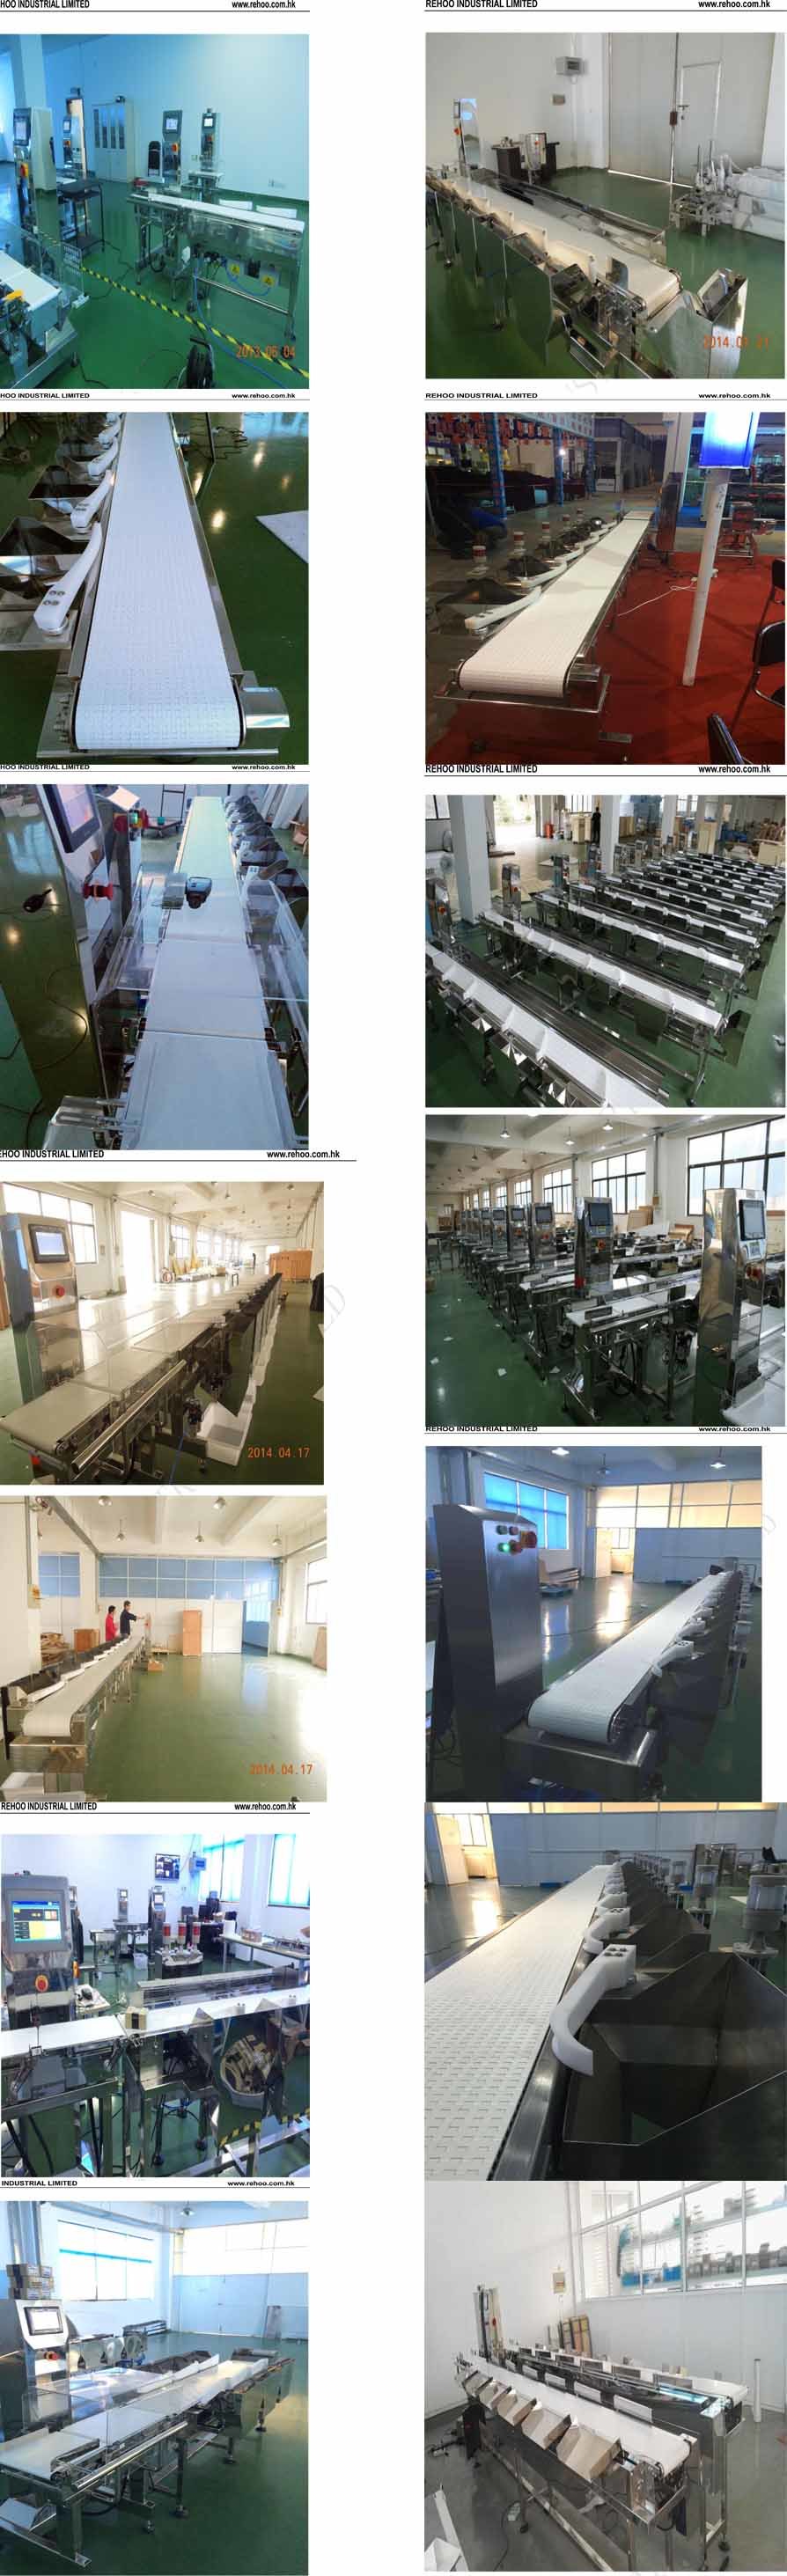 Automatic Weight Grade System/Online Weight Grading Machine/Weight Grade System/Automatic Weight Grading Machine/Weighing Grades